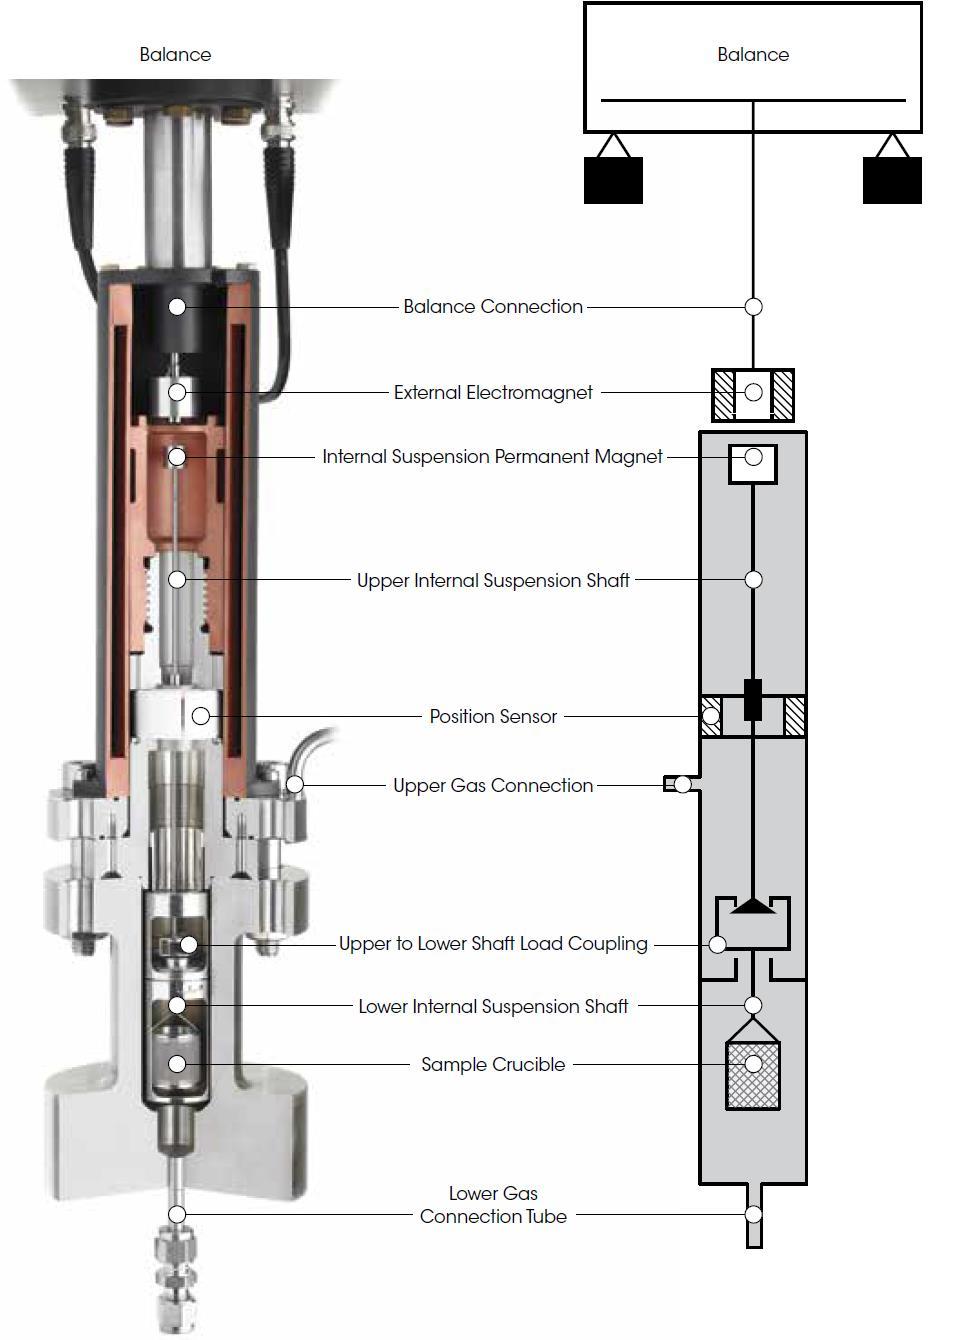 Principle of the Magnetic Suspension Balance Weighing under extreme conditions - Sample in reaction chamber connected to external balance by magnetic coupling - Measuring sample weight in vacuum, at